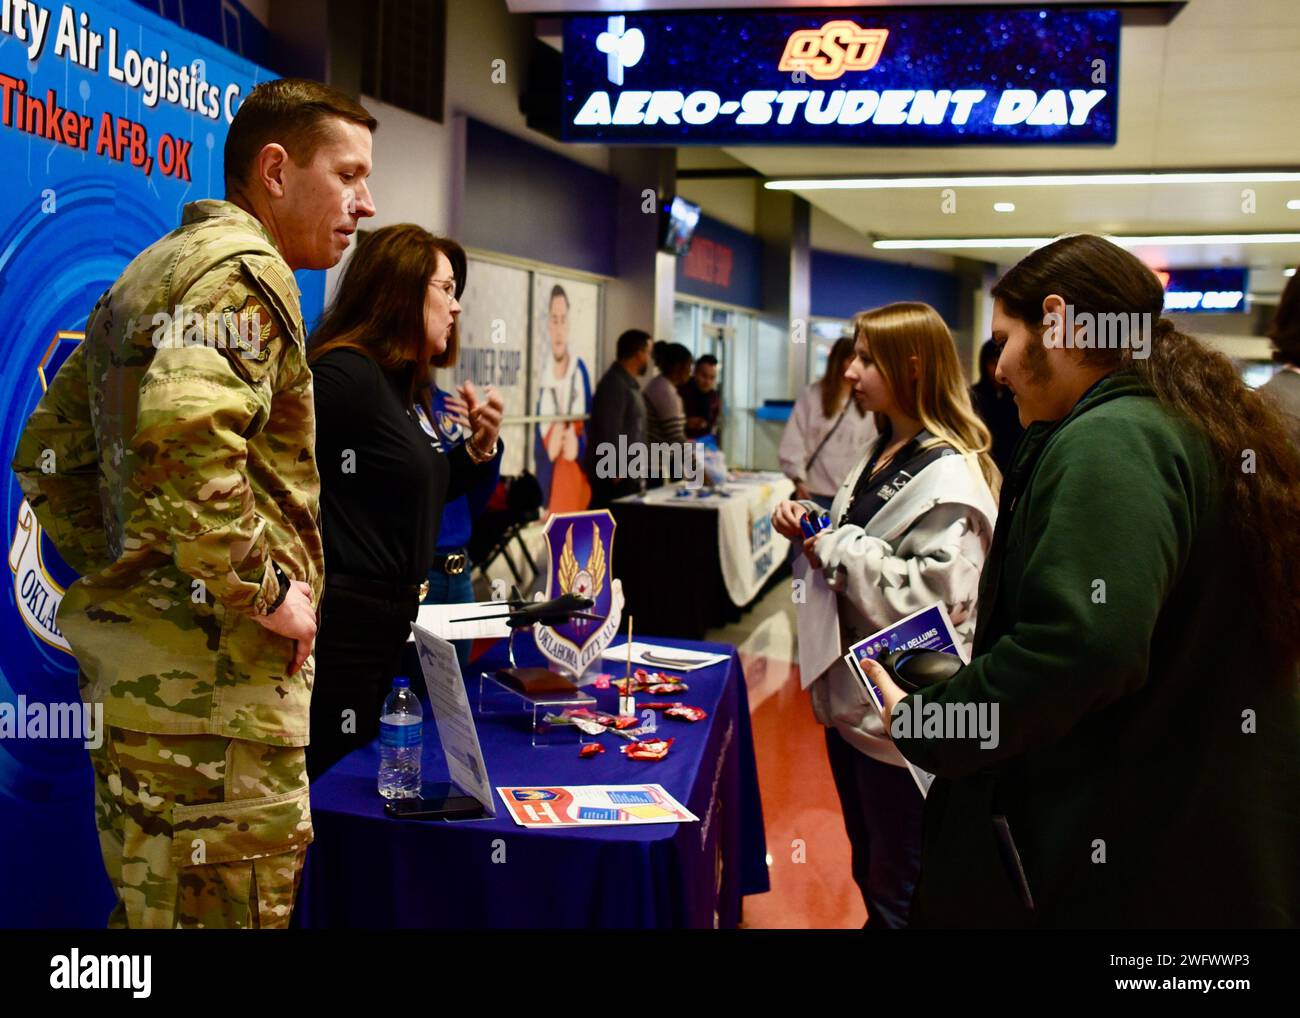 OKLAHOMA CITY —Col Jeffrey Anderson, left, deputy commander of the Oklahoma City Air Logistics Complex, and Tina Murphy, a member of the OC-ALC community engagement & outreach team, speak to high school students at the OC-ALC informational booth during the OKC Thunder’s Aero-Student Day at the Paycom Center Jan. 23. More than 450 high school students attended the event to learn more about careers in the aerospace industry. Stock Photo